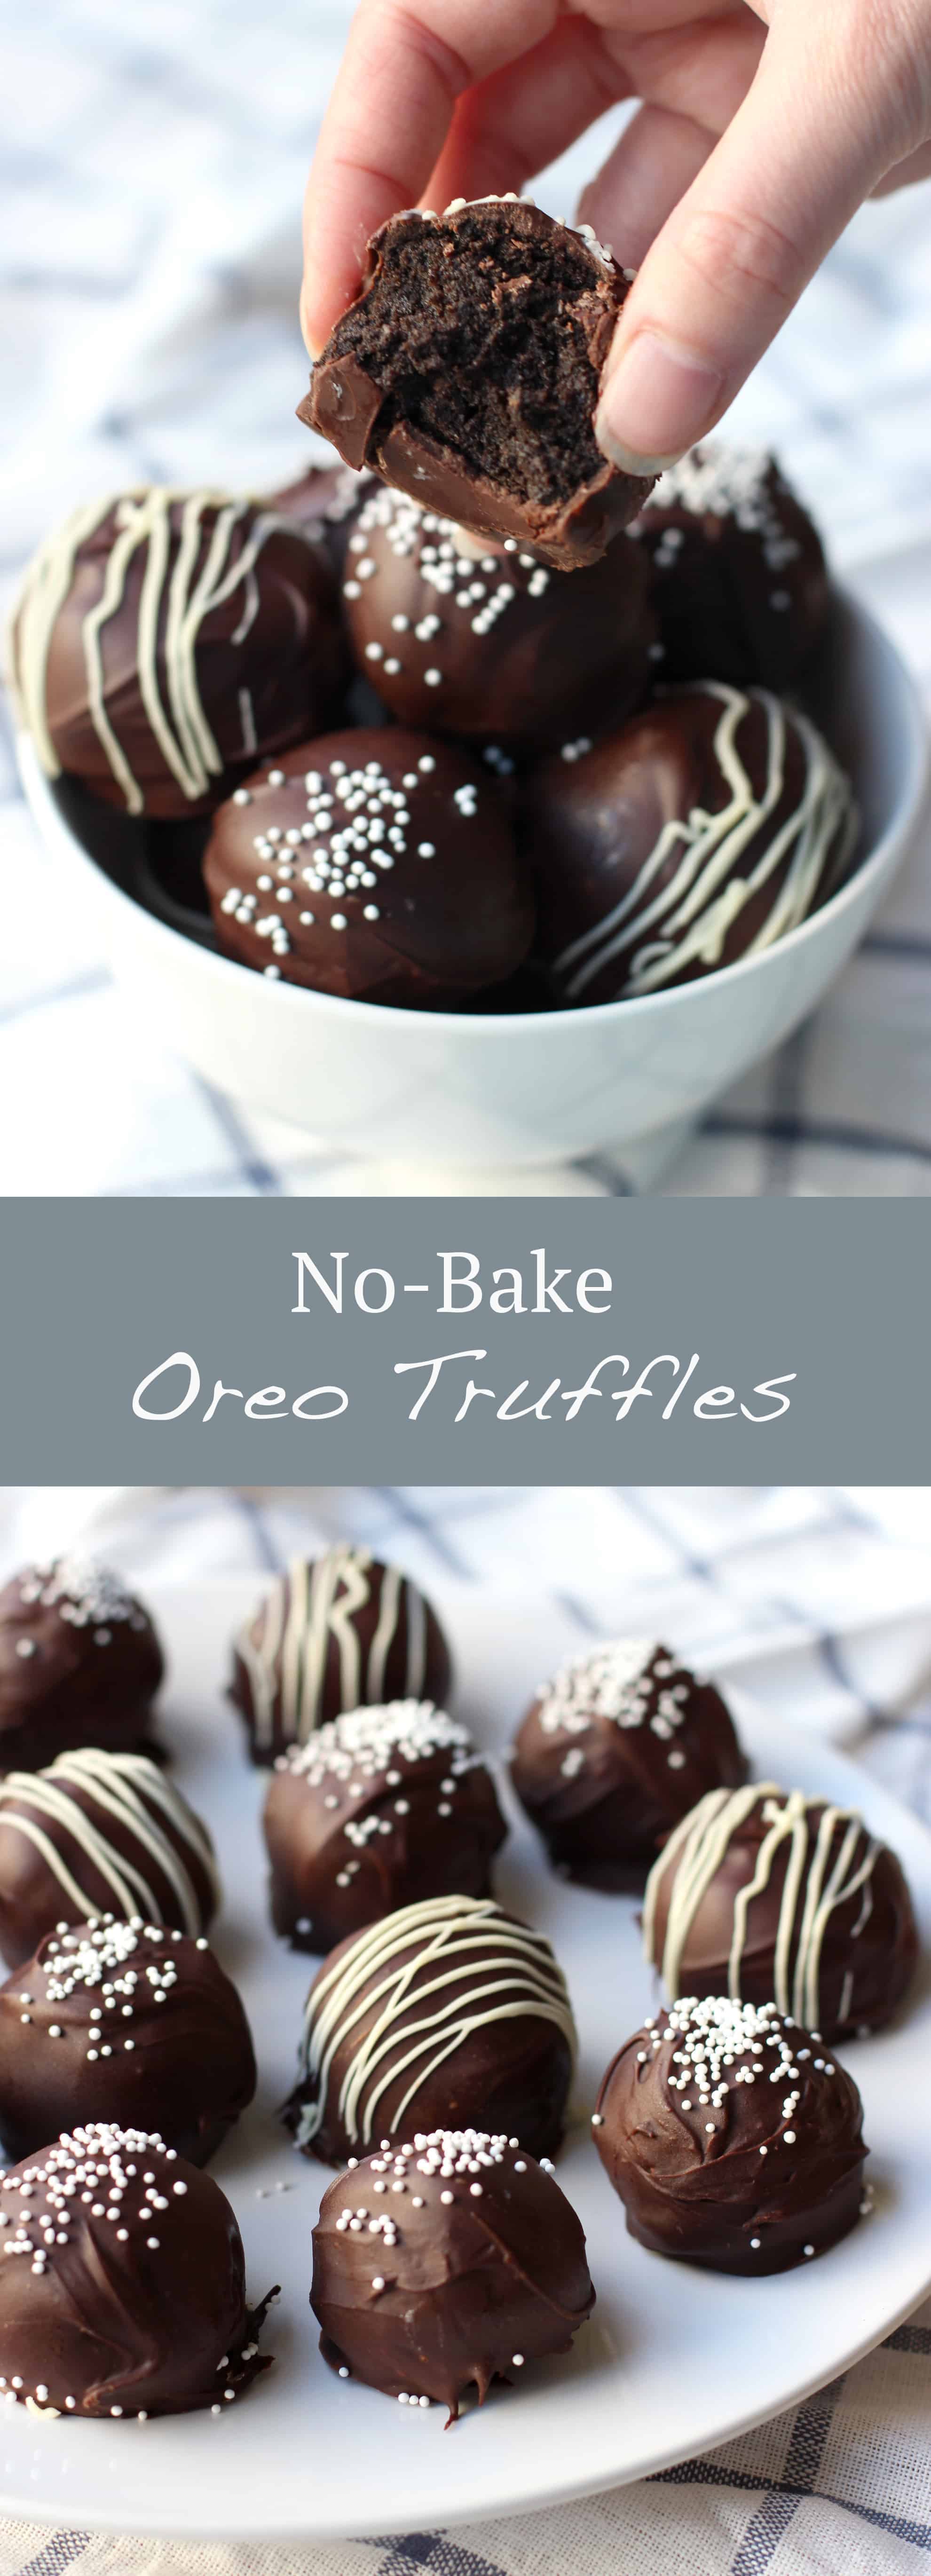 Oreo Truffles - the perfect no-bake treat! These Oreo Balls combine lots of crushed Oreos with cream cheese, covered with lots of chocolate. Such a delicious and easy dessert and sweet treat. via @joyousapron